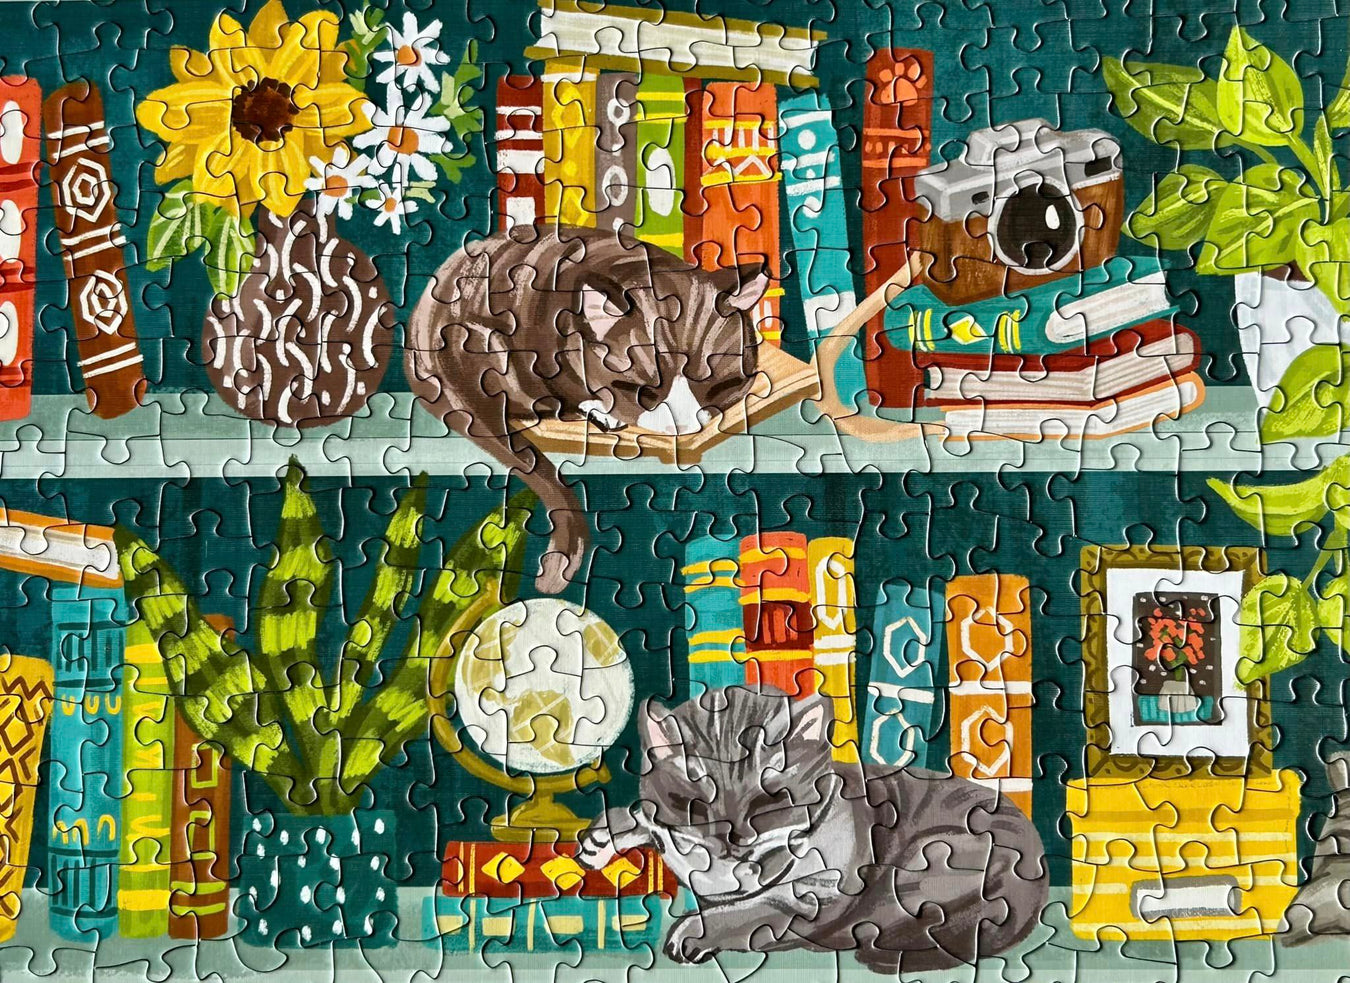 Cats on a bookshelf with books and plants jigsaw puzzle